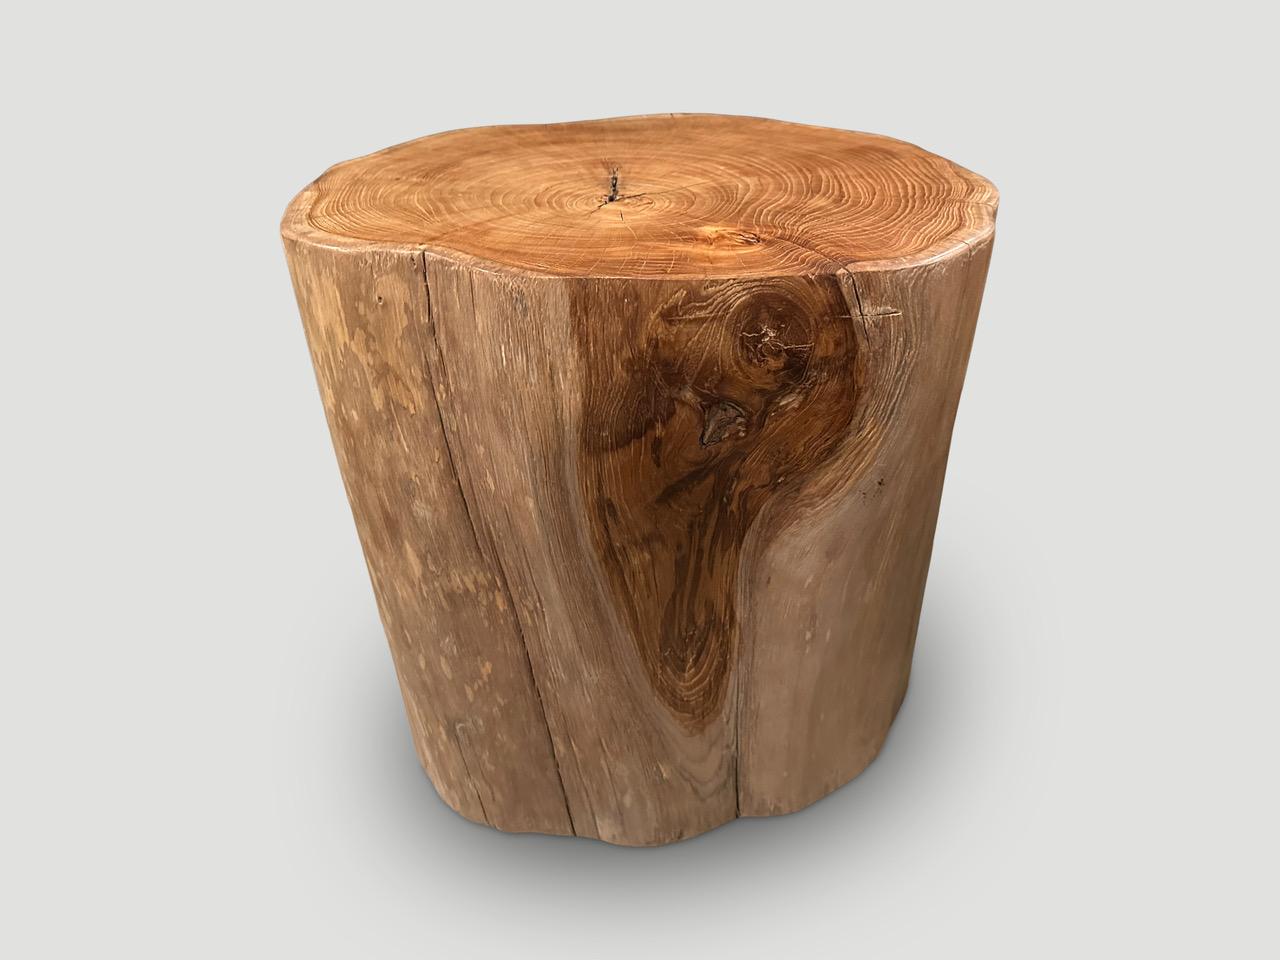 Impressive large scale solid reclaimed teak wood side table. We added a natural oil revealing the beautiful wood grain. Also available charred.

Own an Andrianna Shamaris original.

Andrianna Shamaris. The Leader In Modern Organic Design.